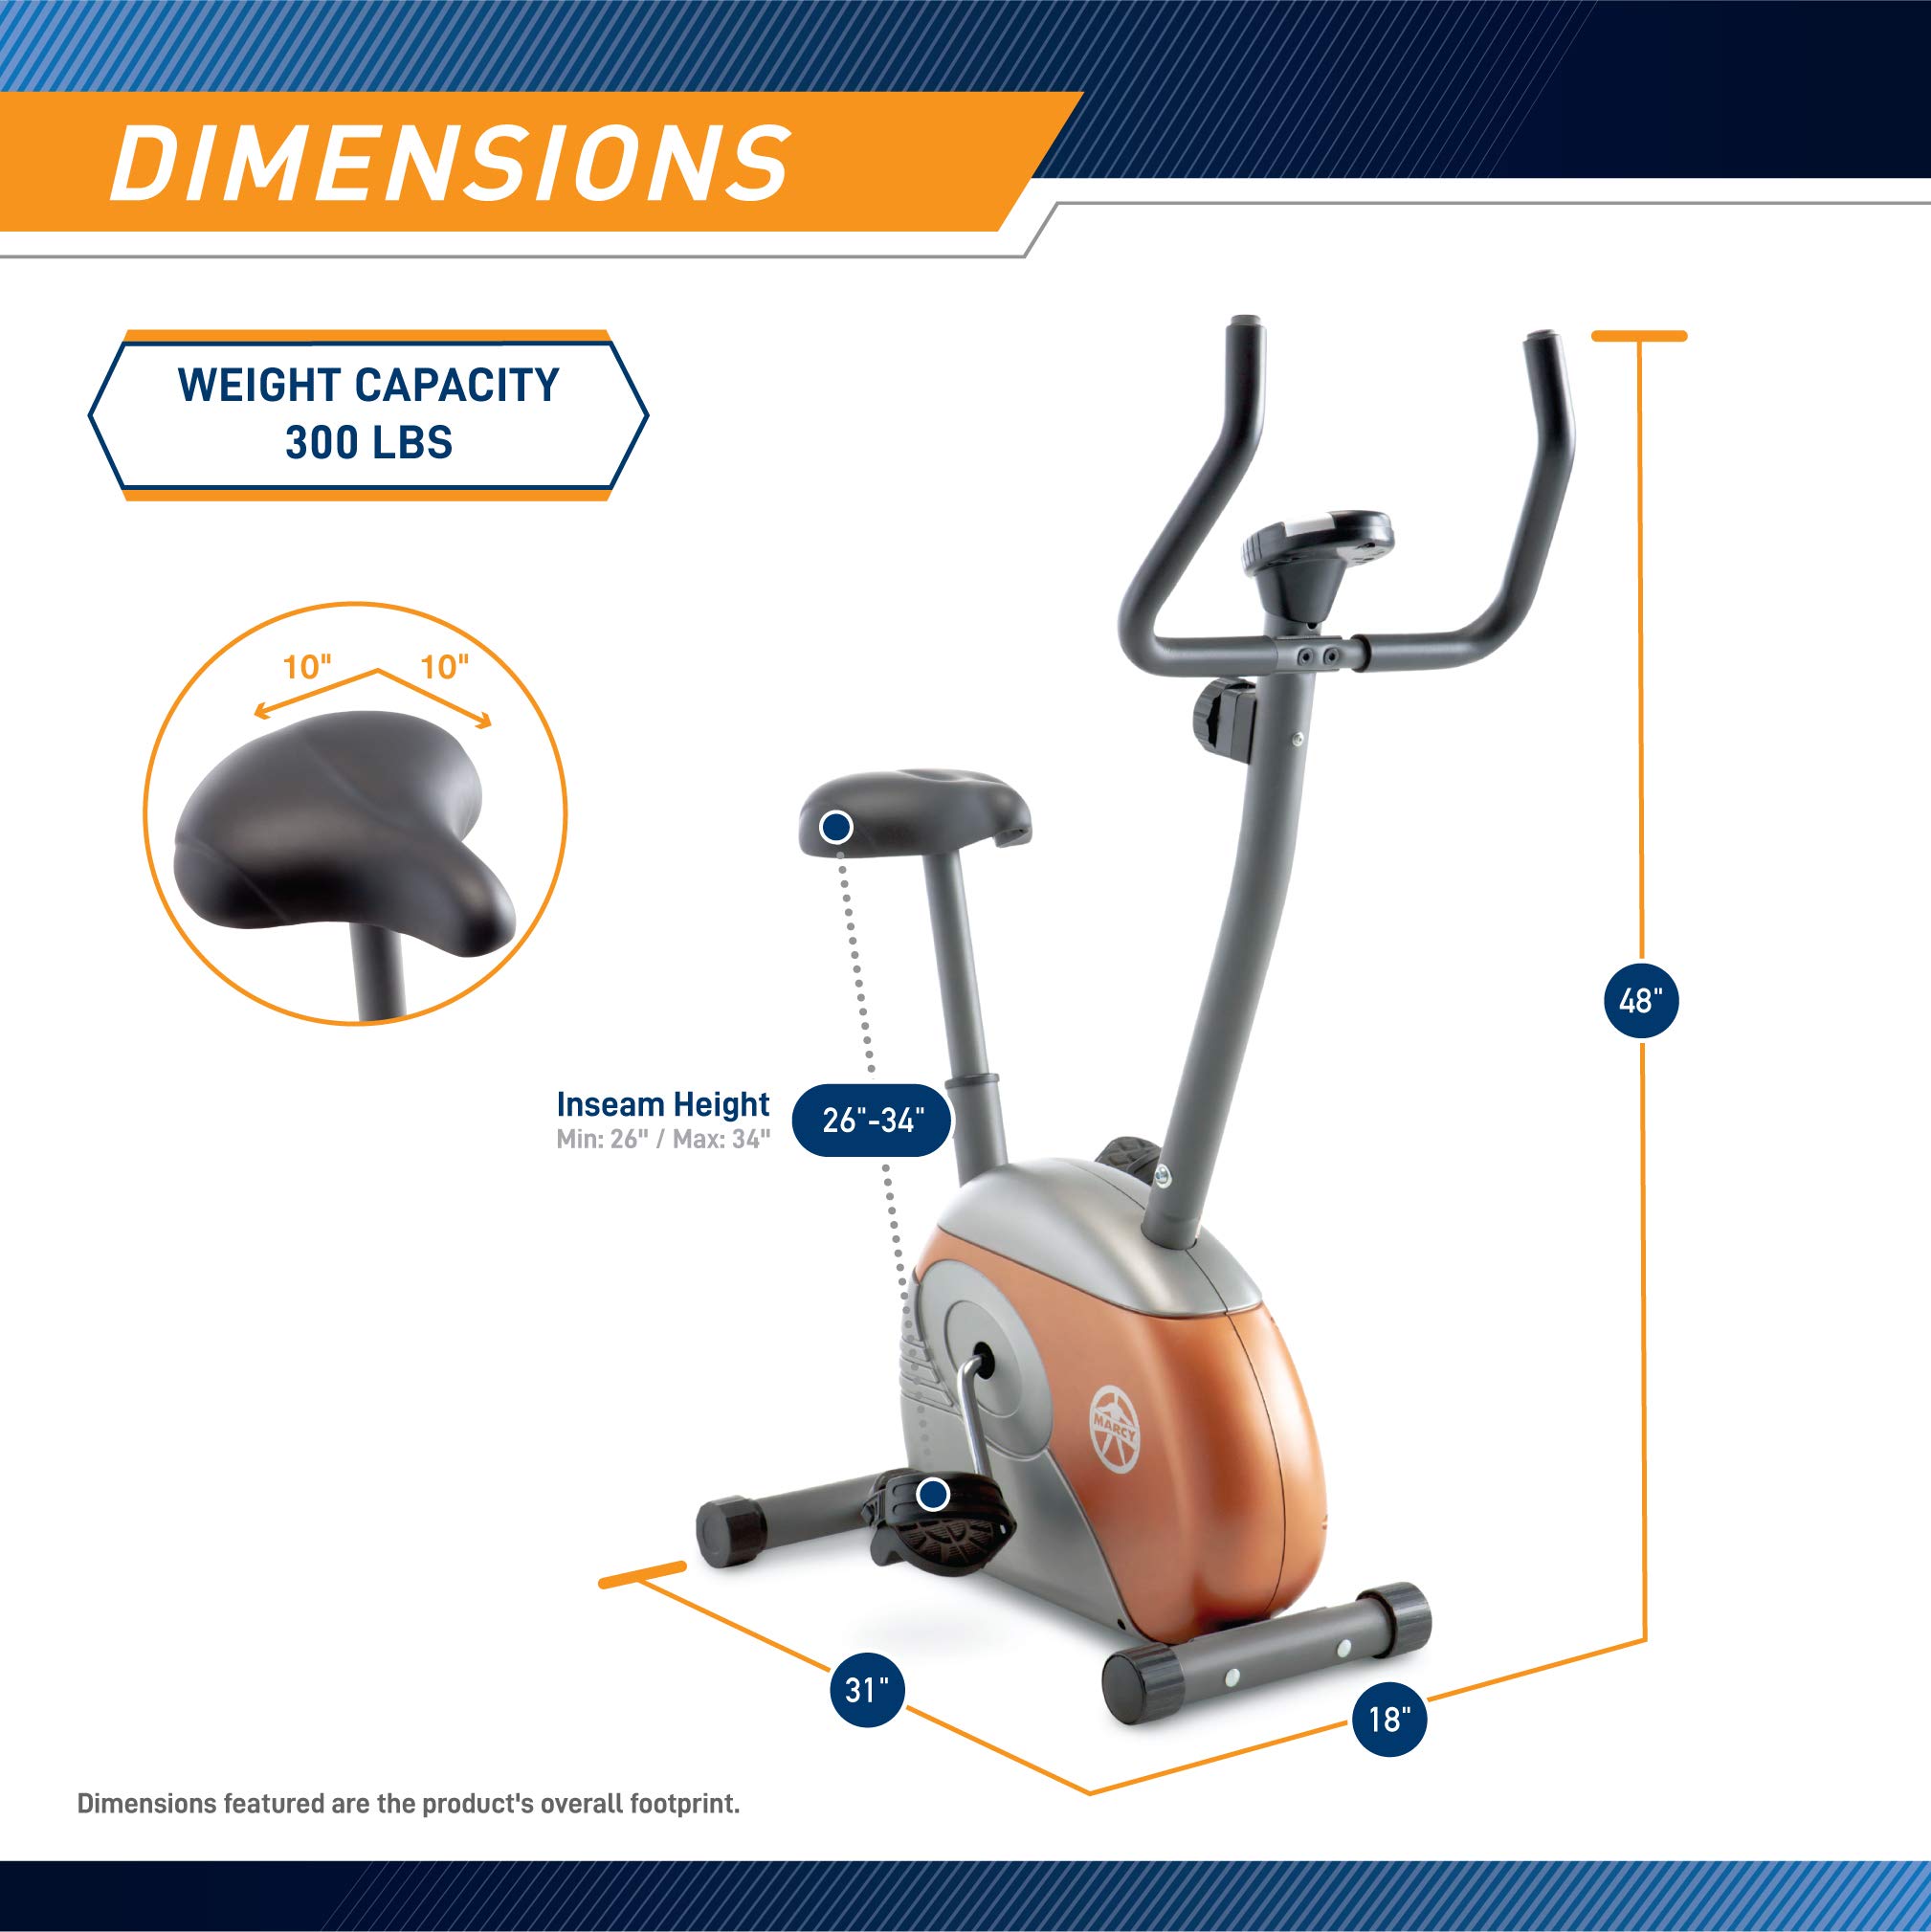 Marcy Upright Exercise Bike with Resistance ME-708